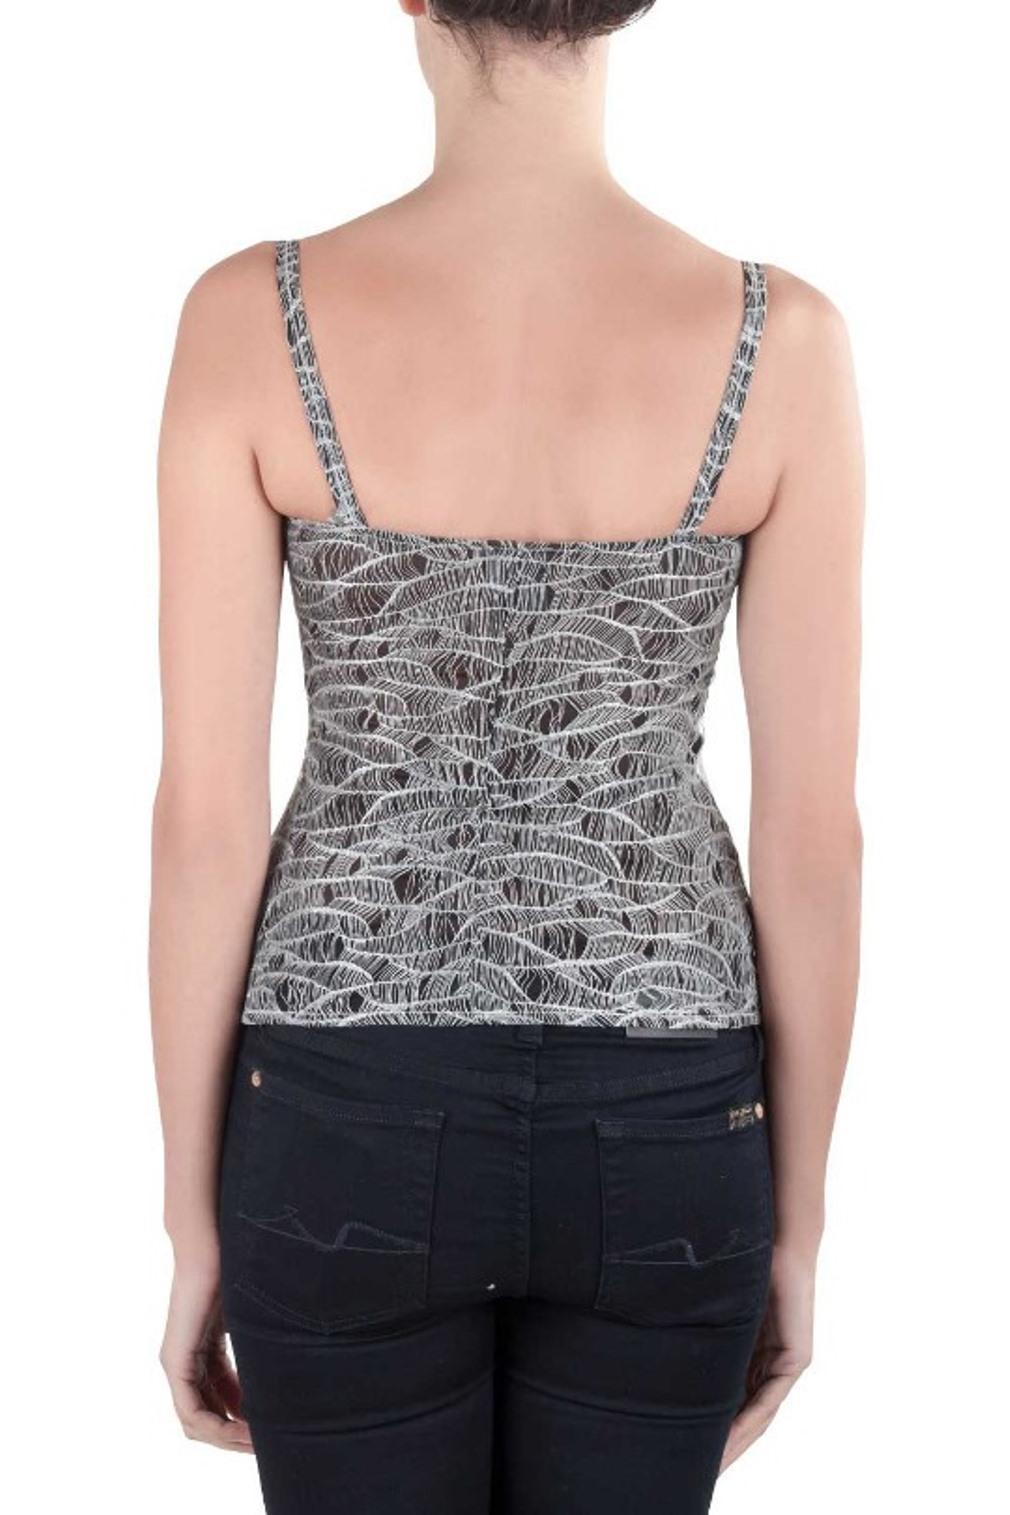 Made by Chanel, this camisole is tailored from nylon. The black metallic creation has beautiful embellishments on the neckline. This is an ideal purchase to stay cool yet fashionable these summers. It will go well with any dark bottoms.

Includes: